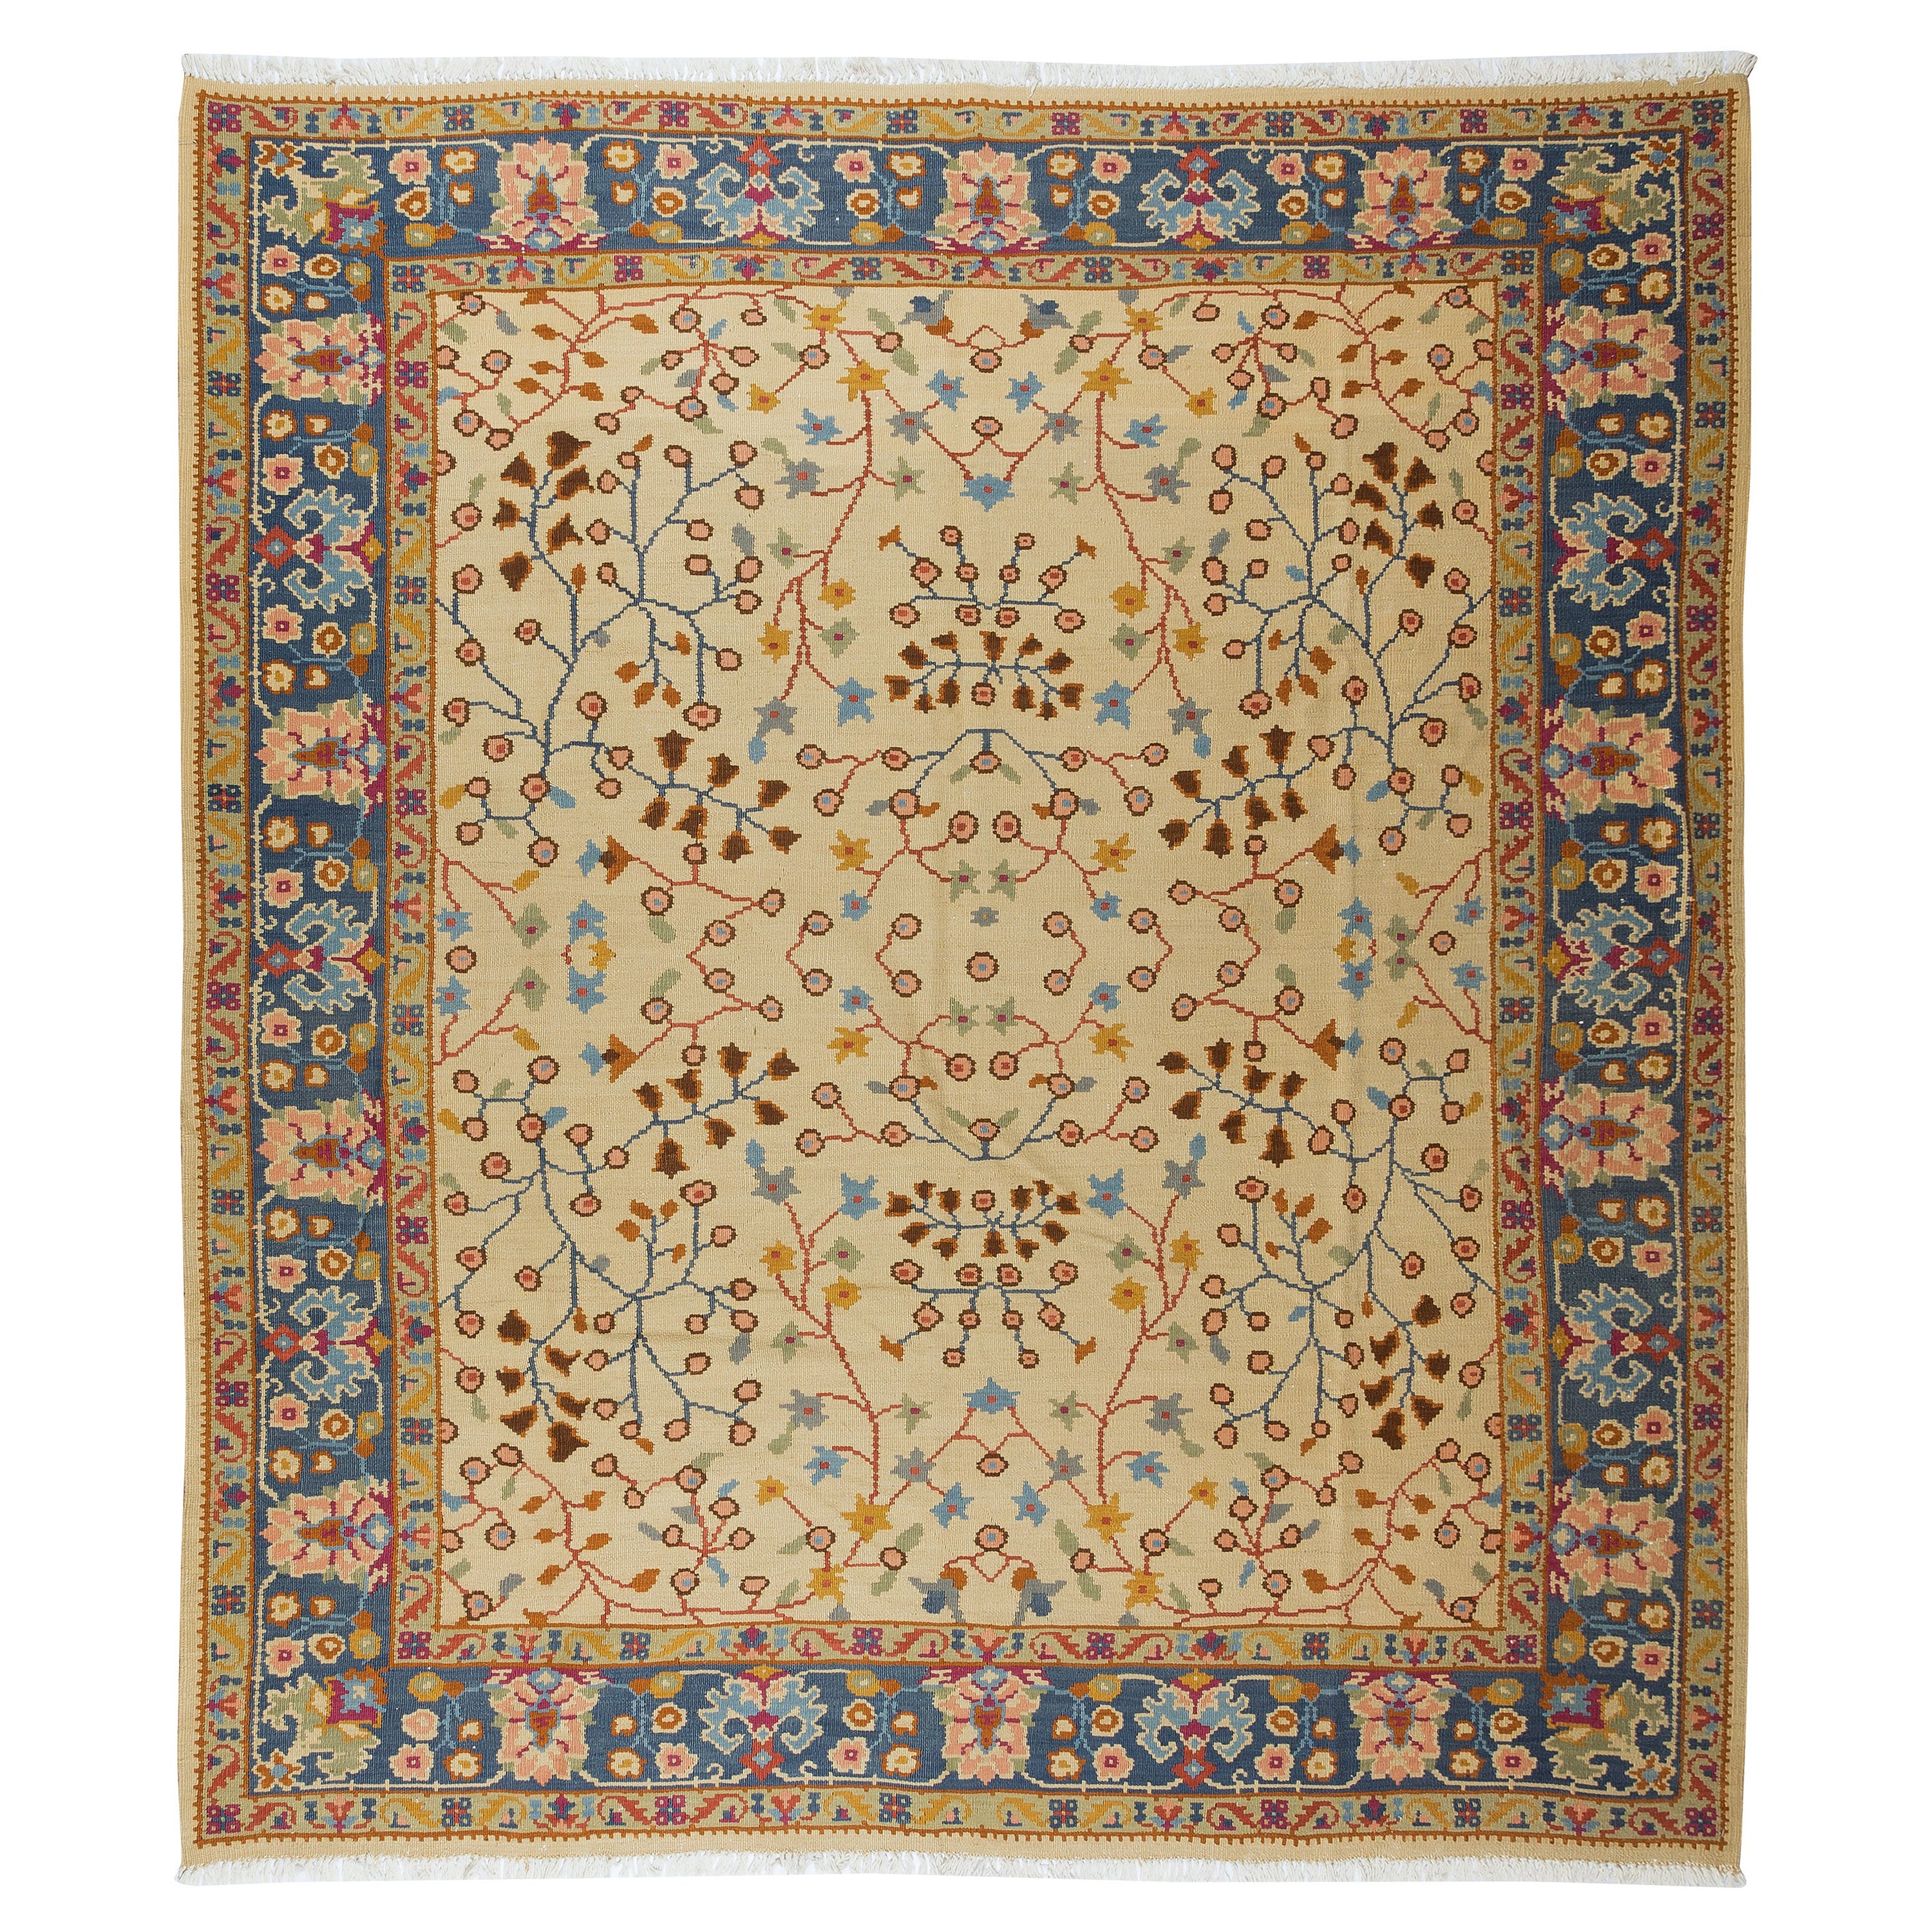 8.8x9.7 Ft Contemporary Rare Size Rug, Floral Handmade Turkish Carpet, All Wool For Sale